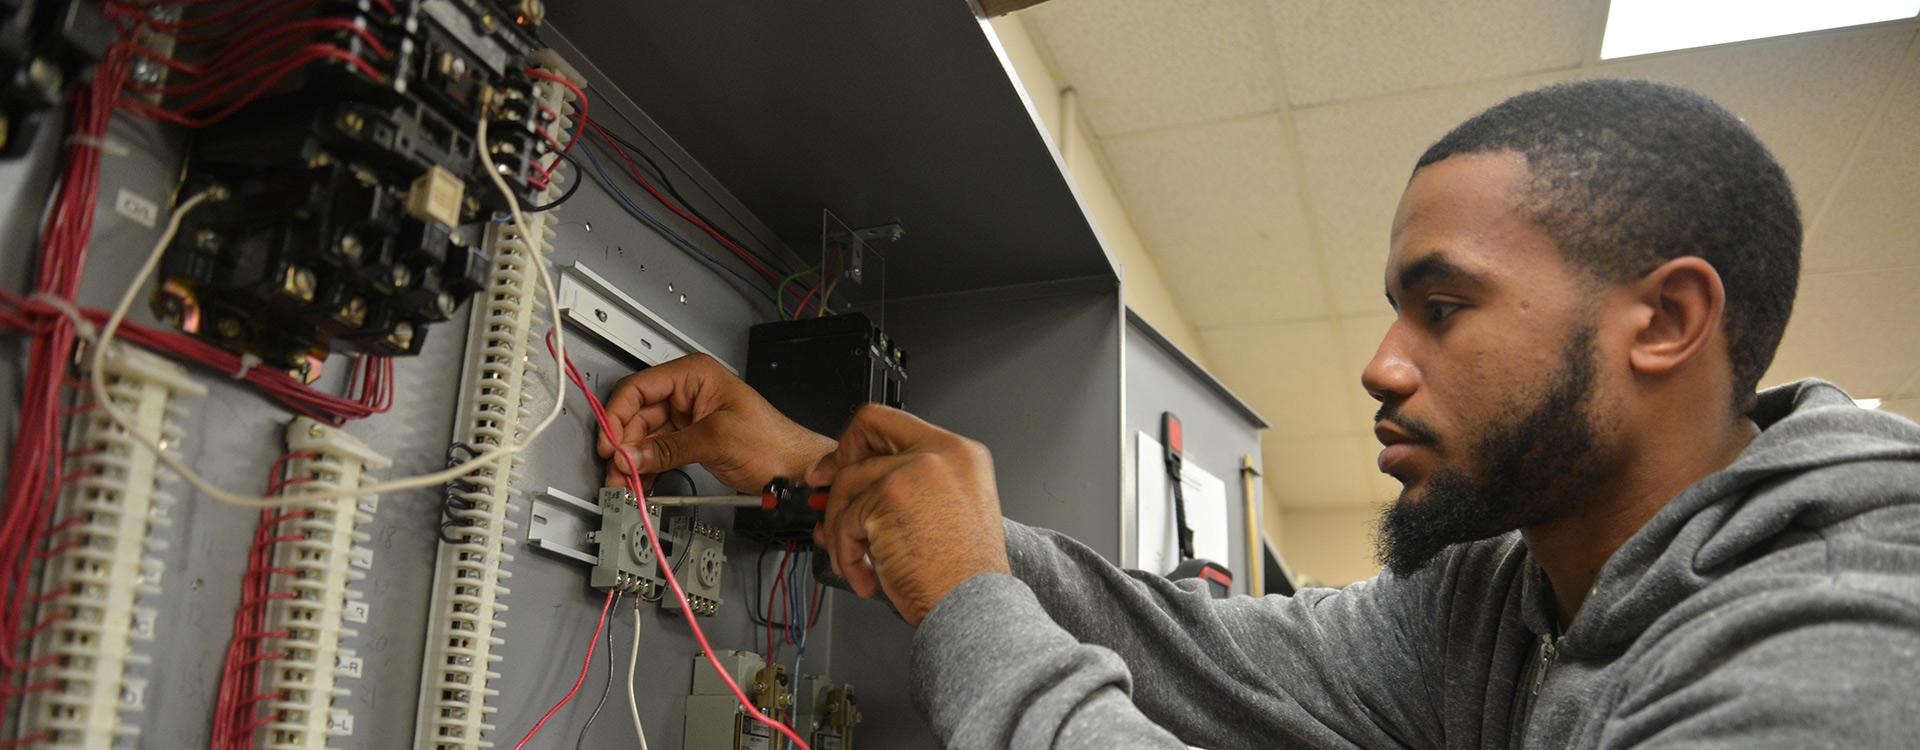 student works on electrical circuitry in lab